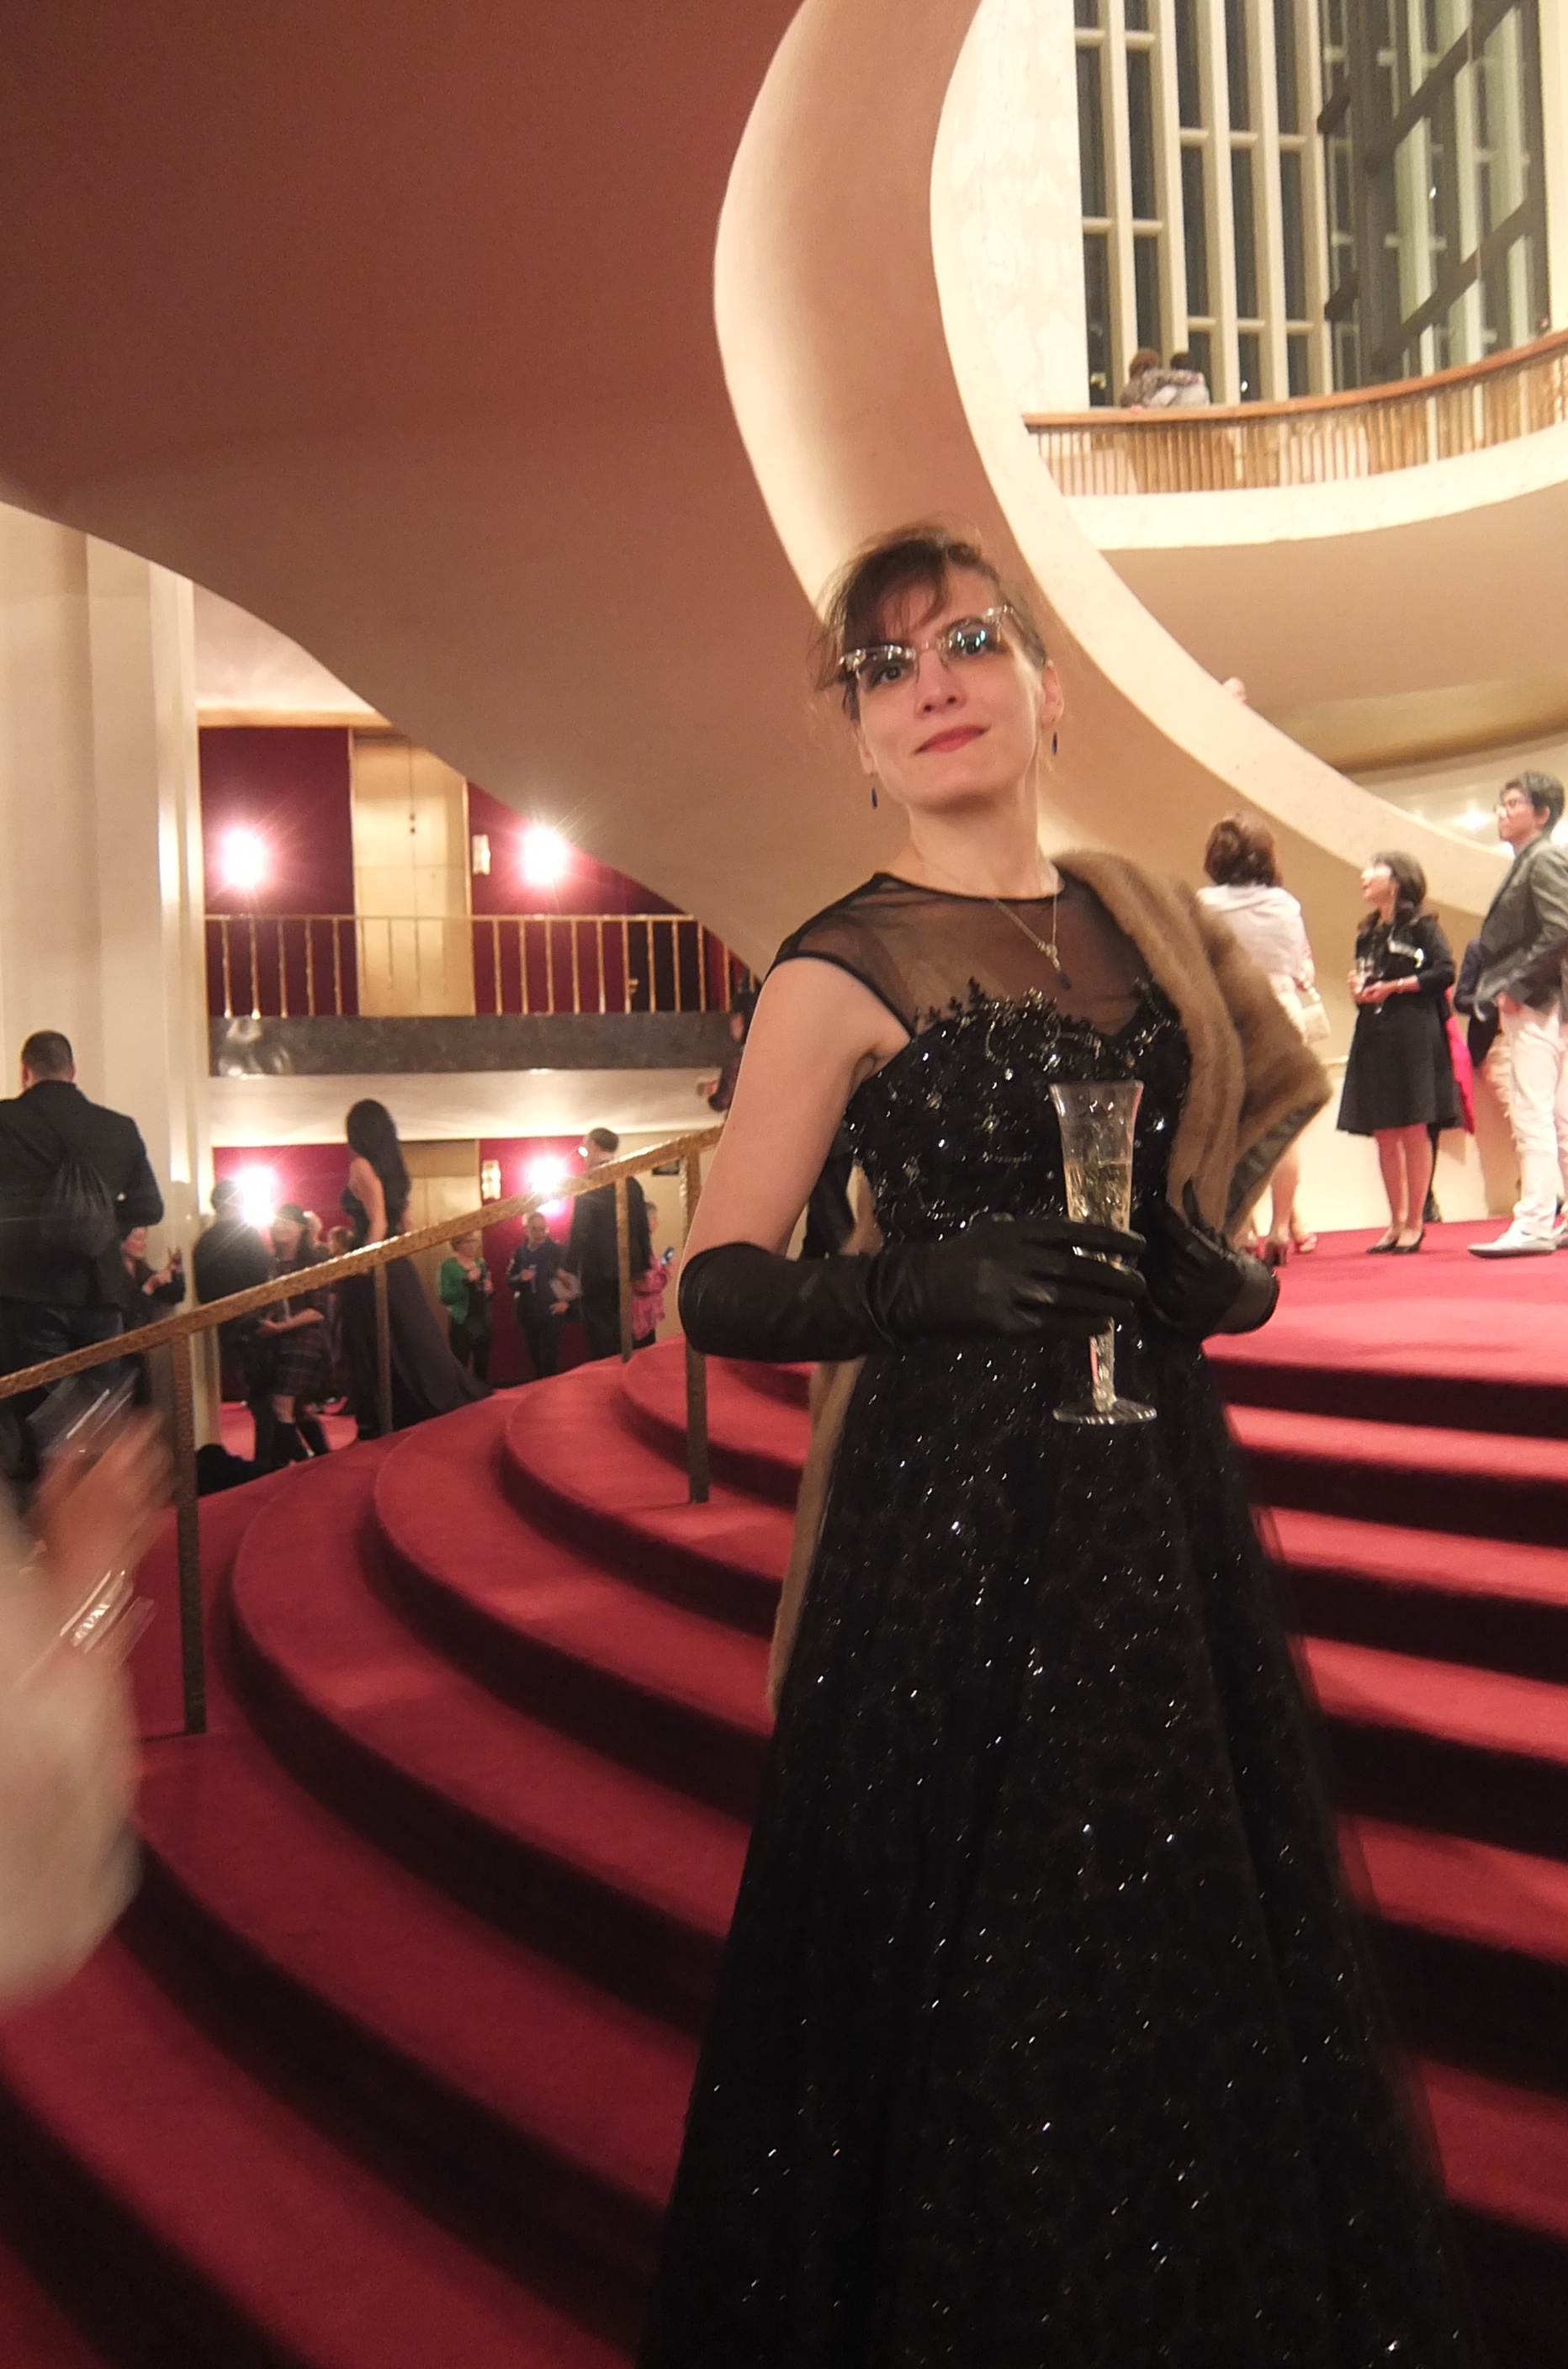 Marie in evening gown with champagne glass at the metropolitan opera